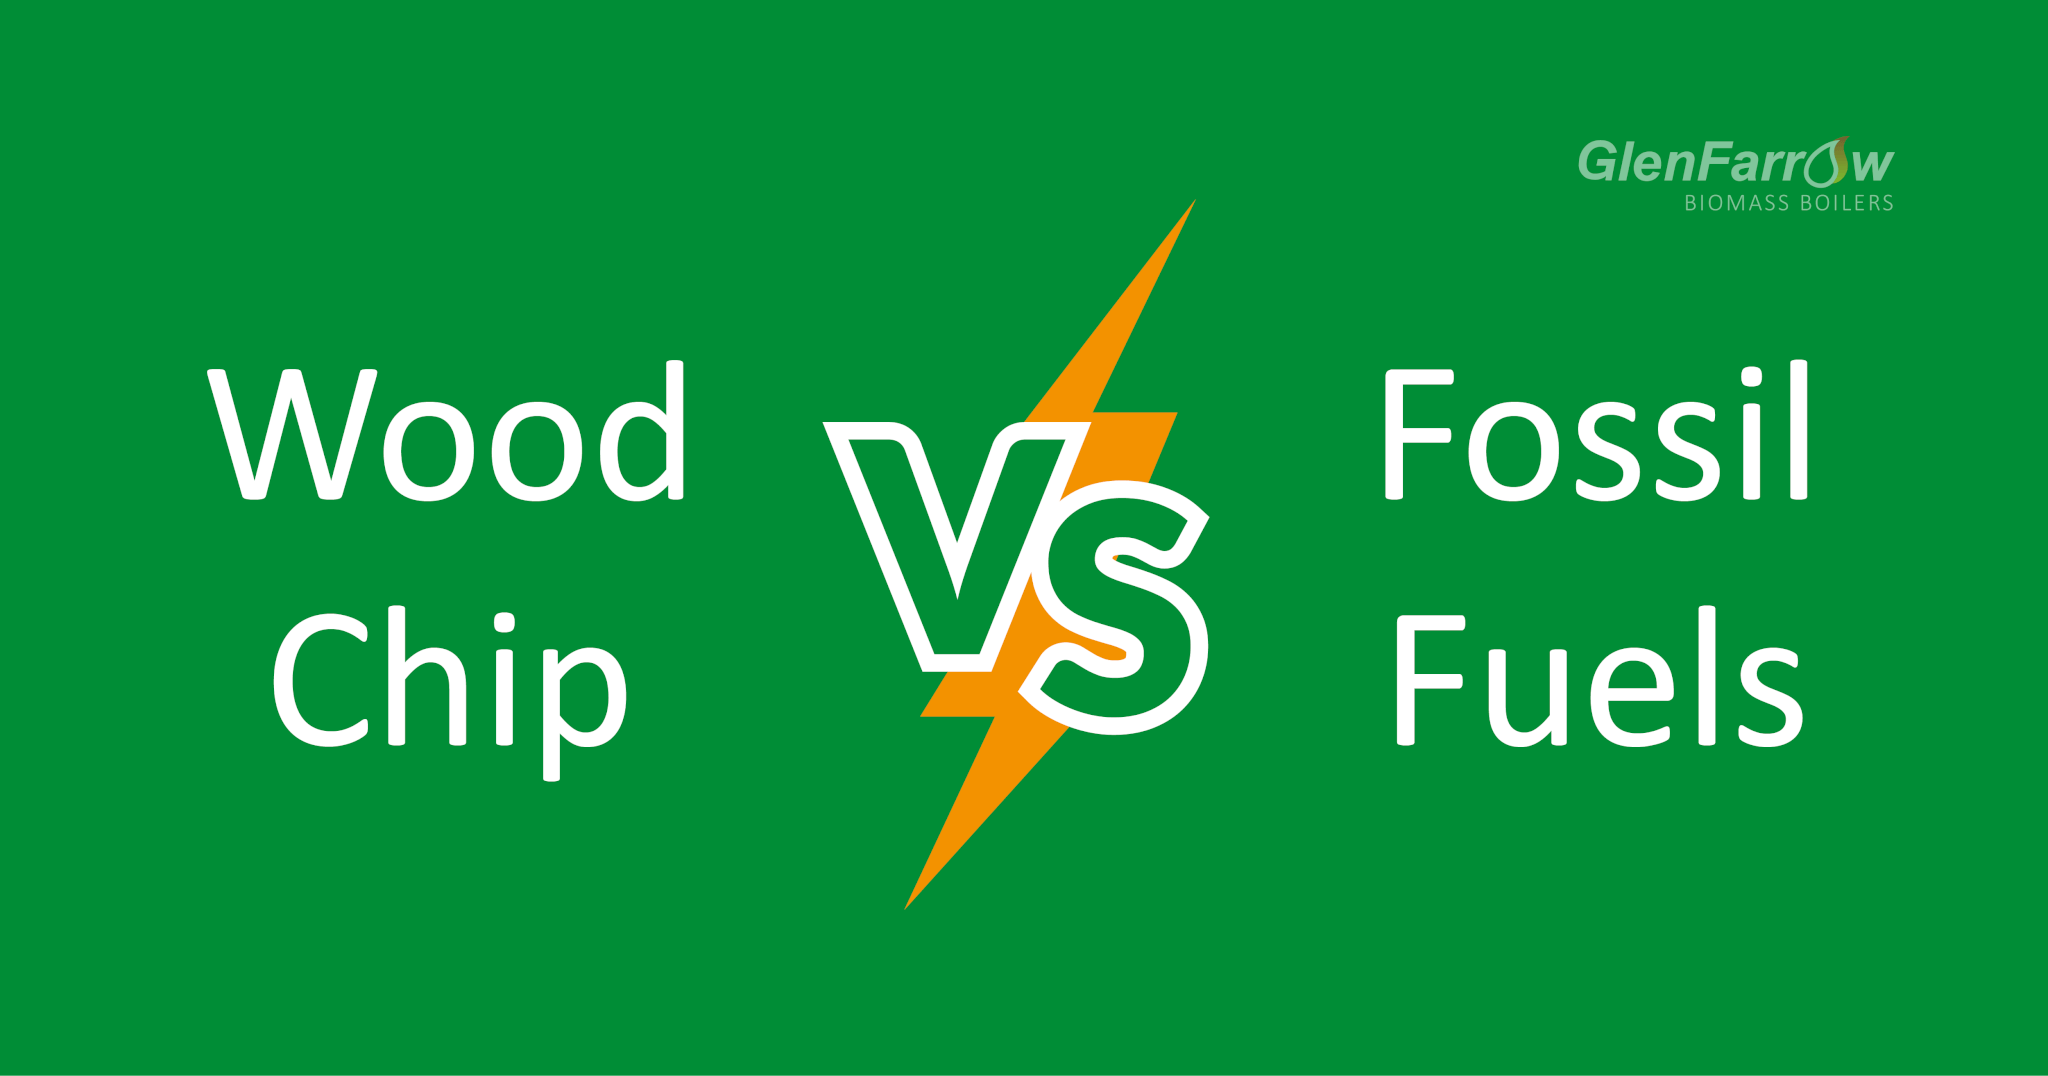 Wood chip vs fossil fuels graphic